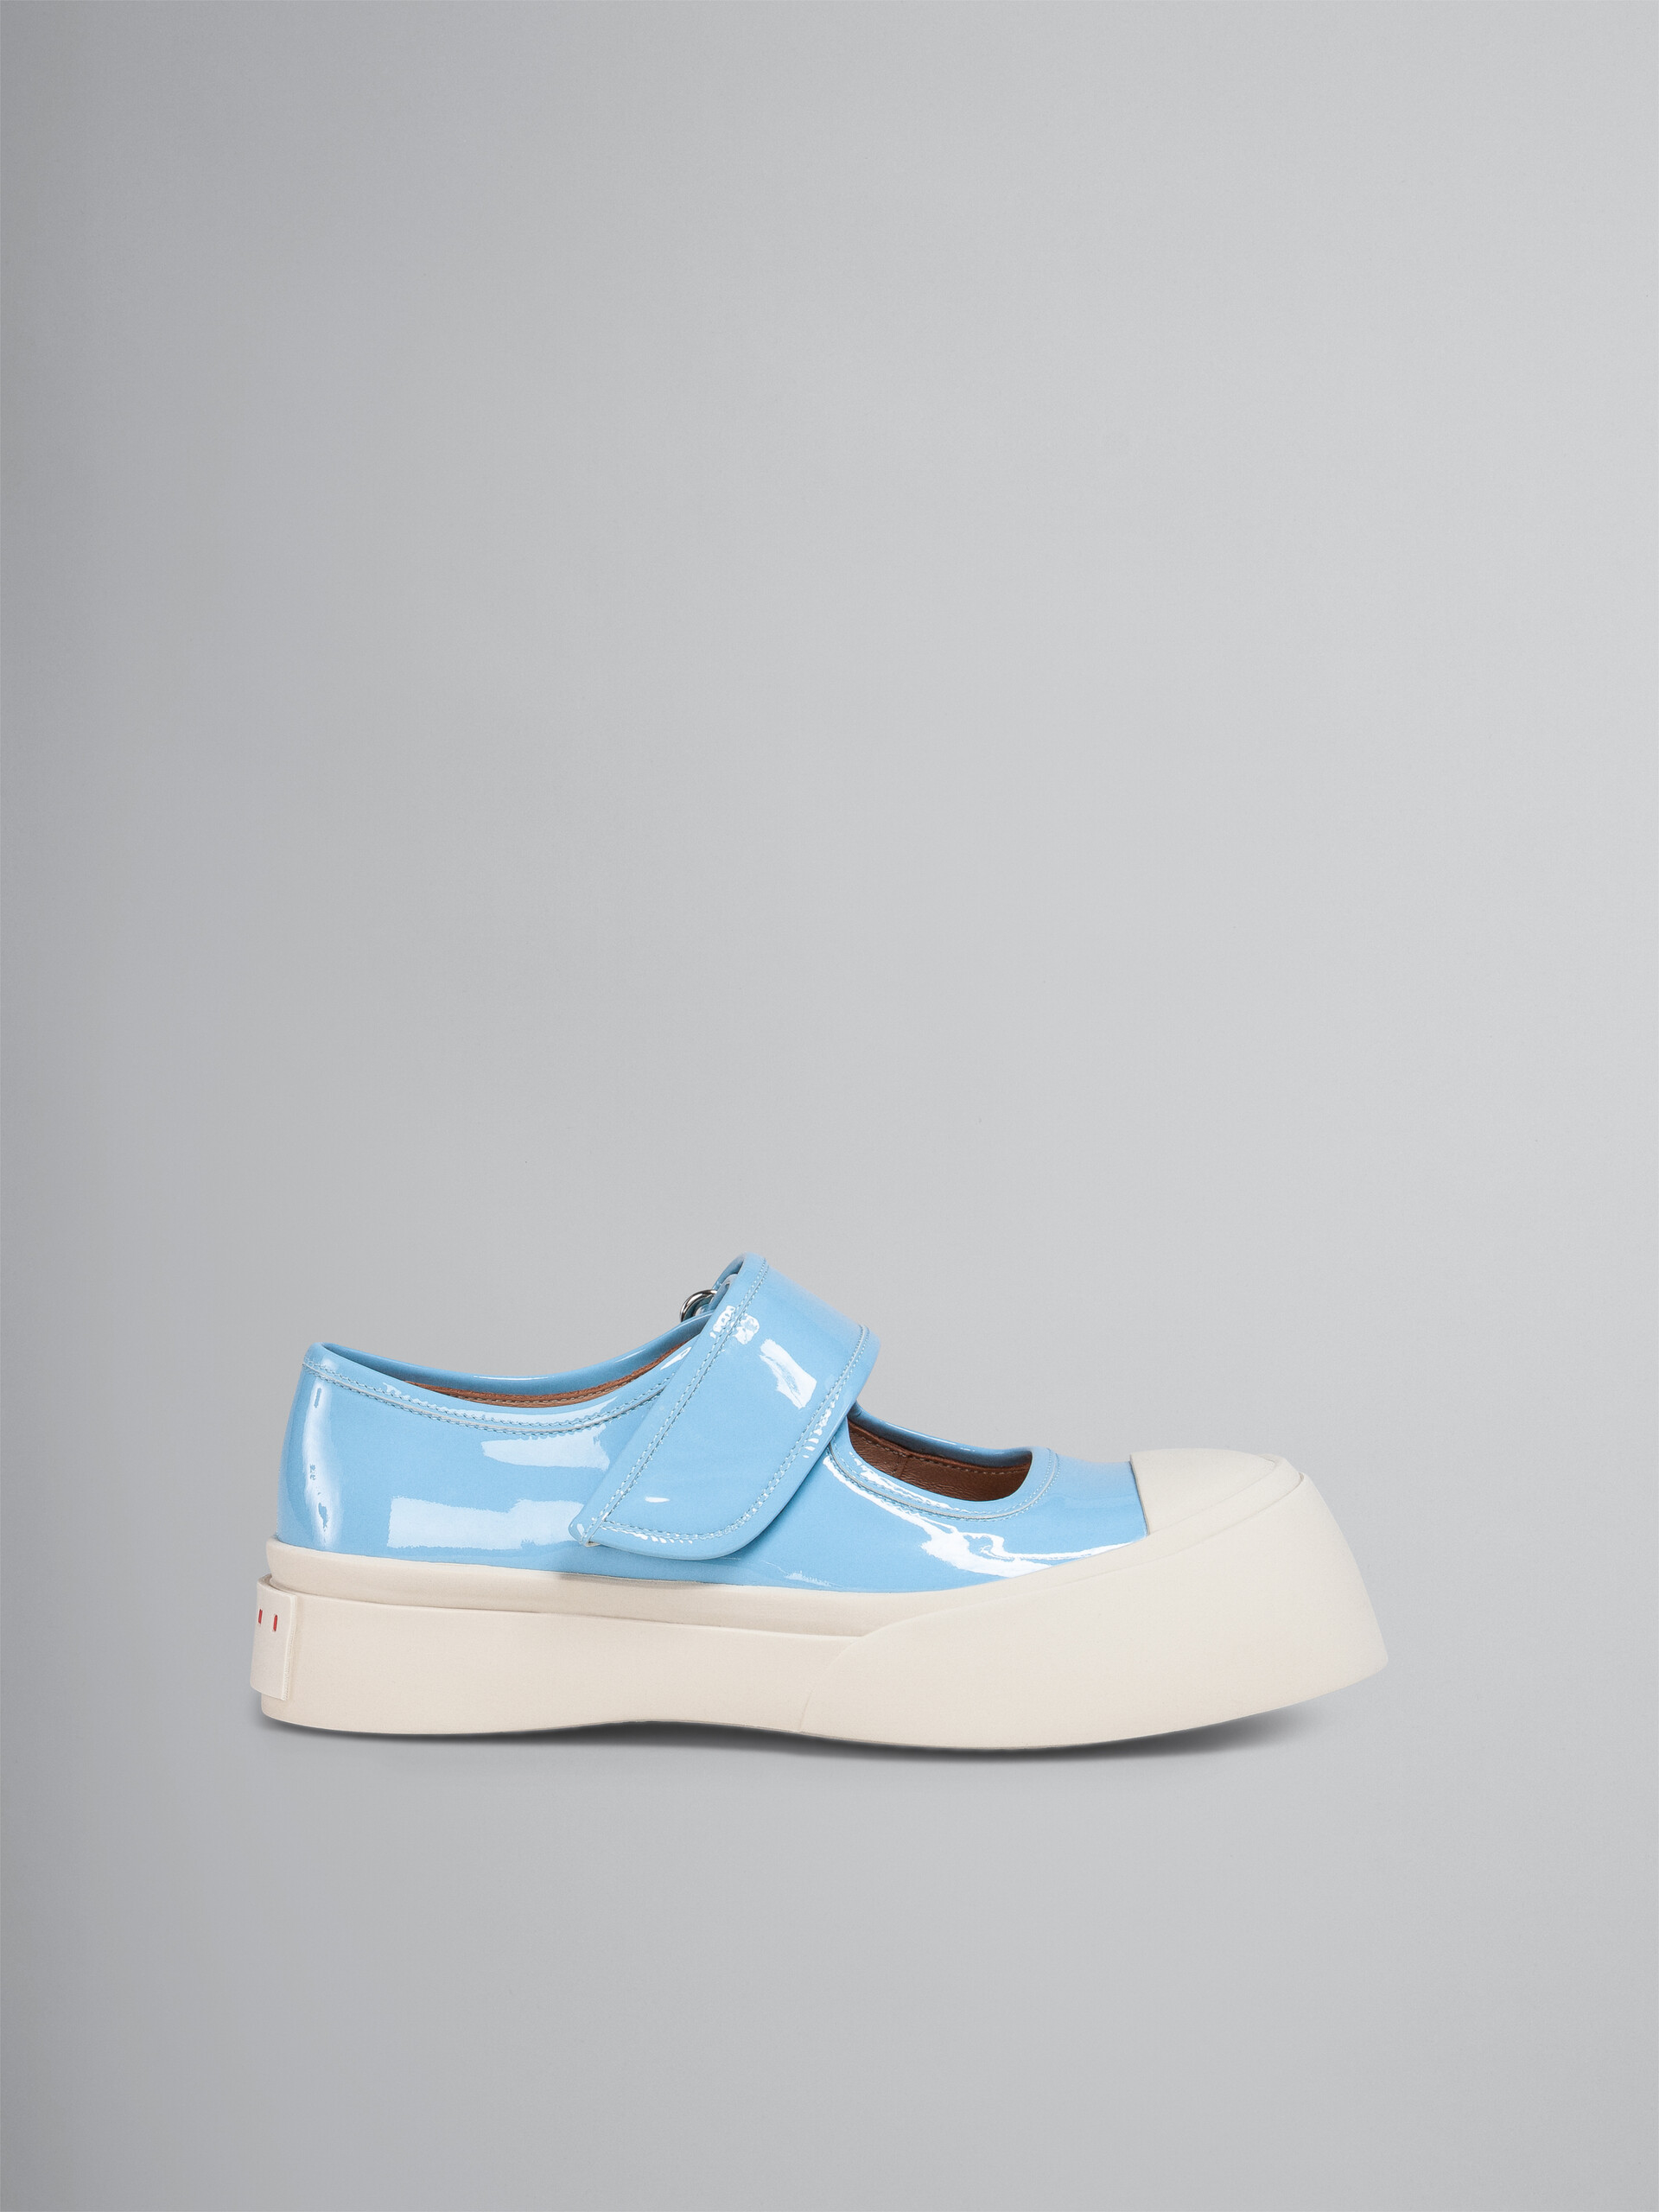 Pale blue patent leather PABLO Mary-Jane sneaker - Sneakers - Image 1